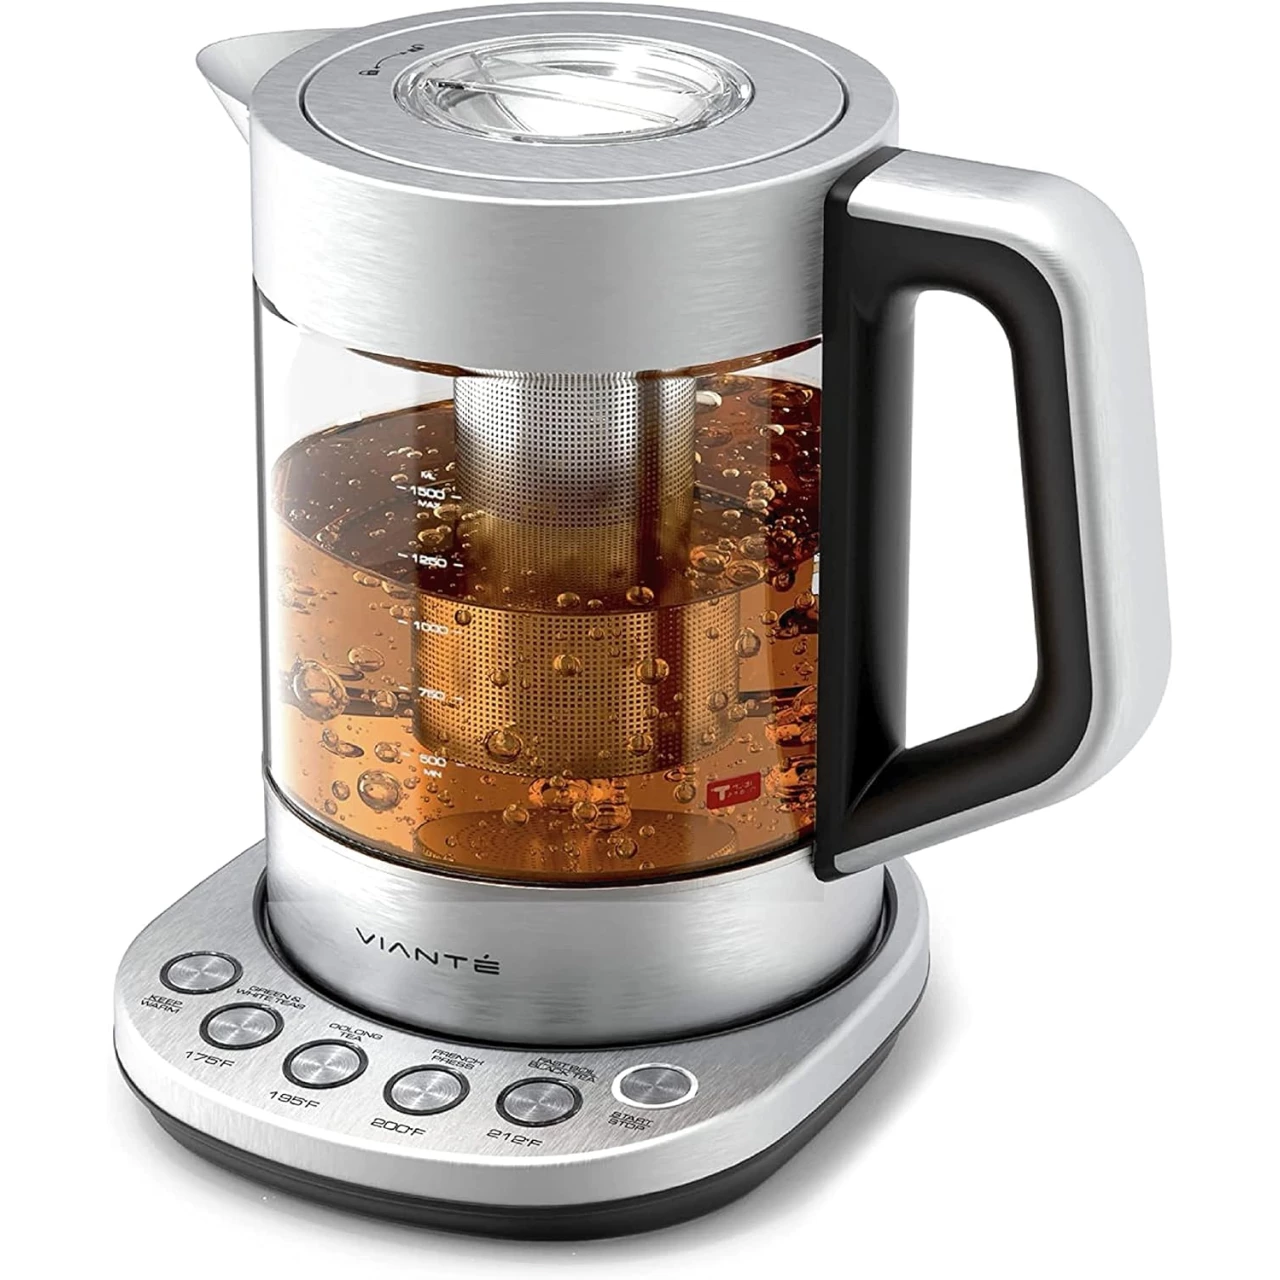 Hot Tea Maker Electric Glass Kettle with tea infuser and temperature control. Automatic Shut off.